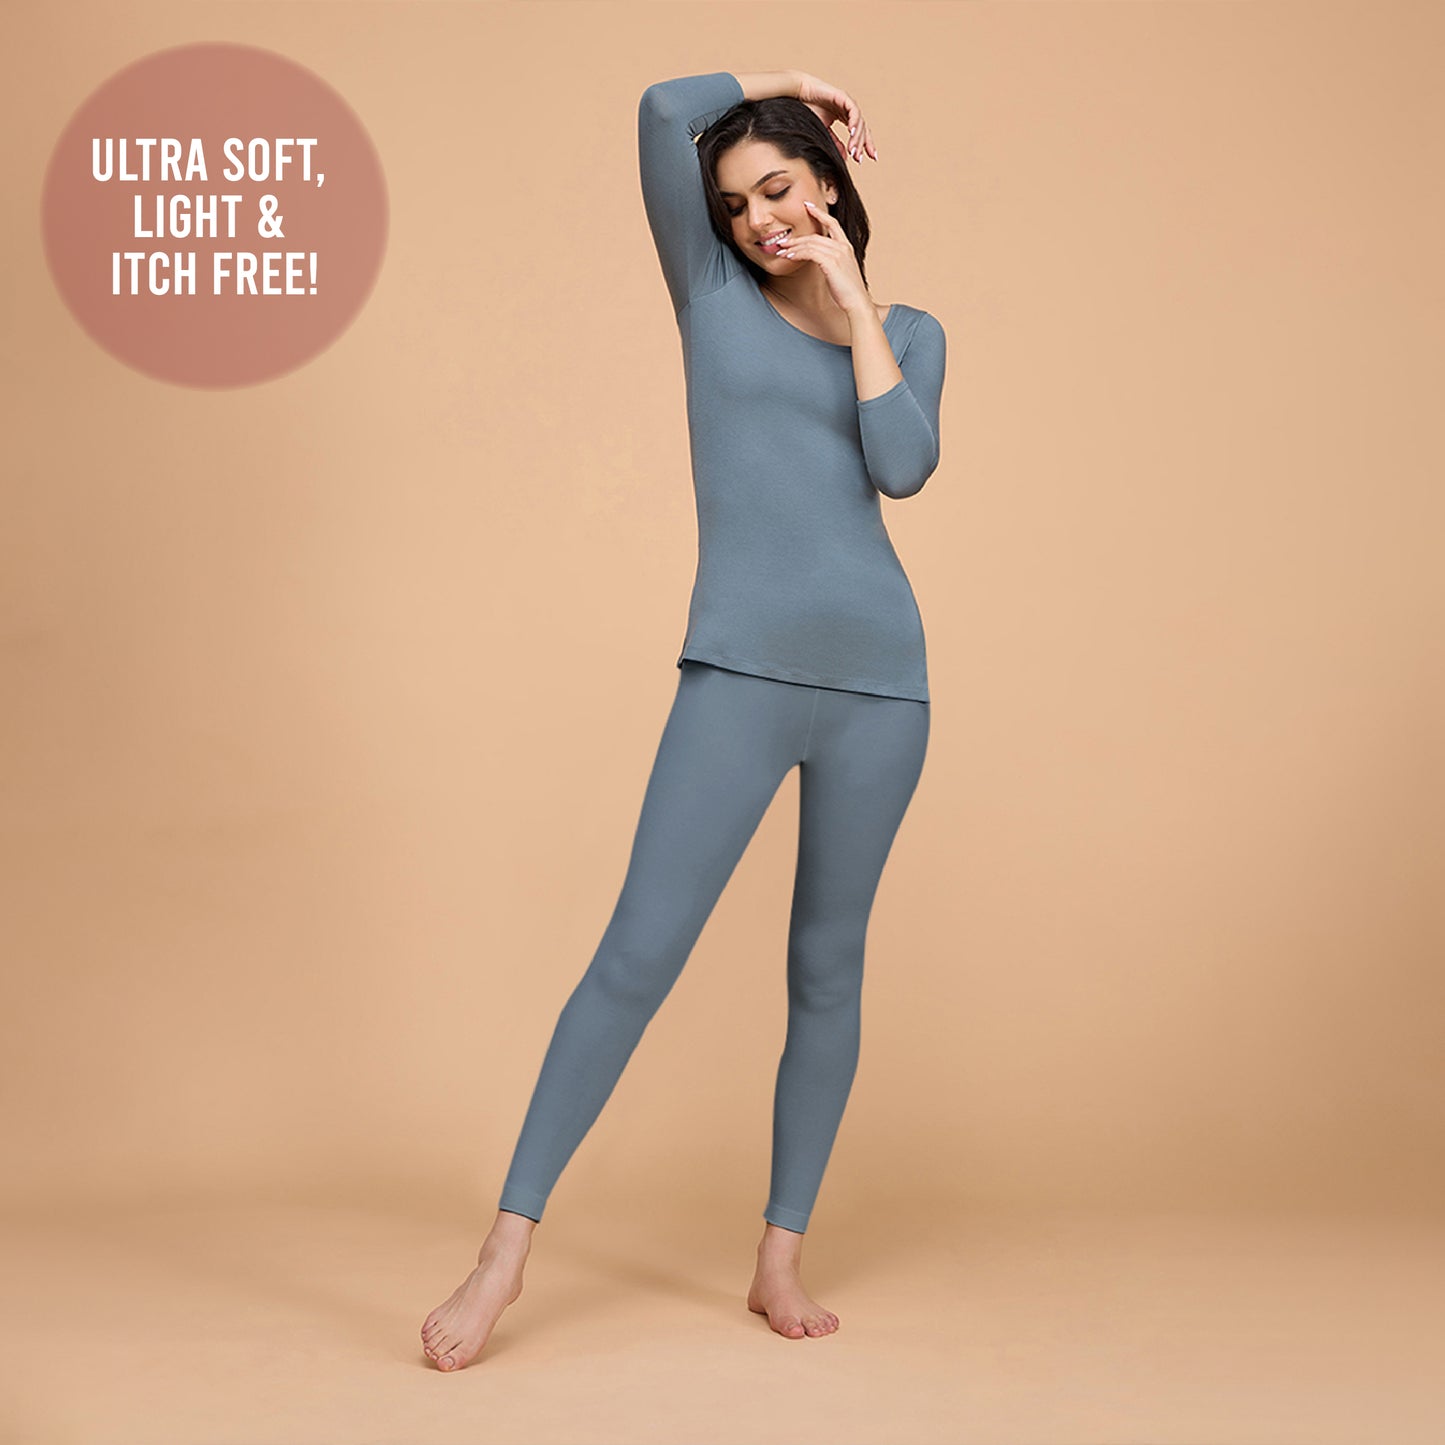 Ultra Light and Soft Thermal Top that stays hidden under clothes -NYOE05 Grey